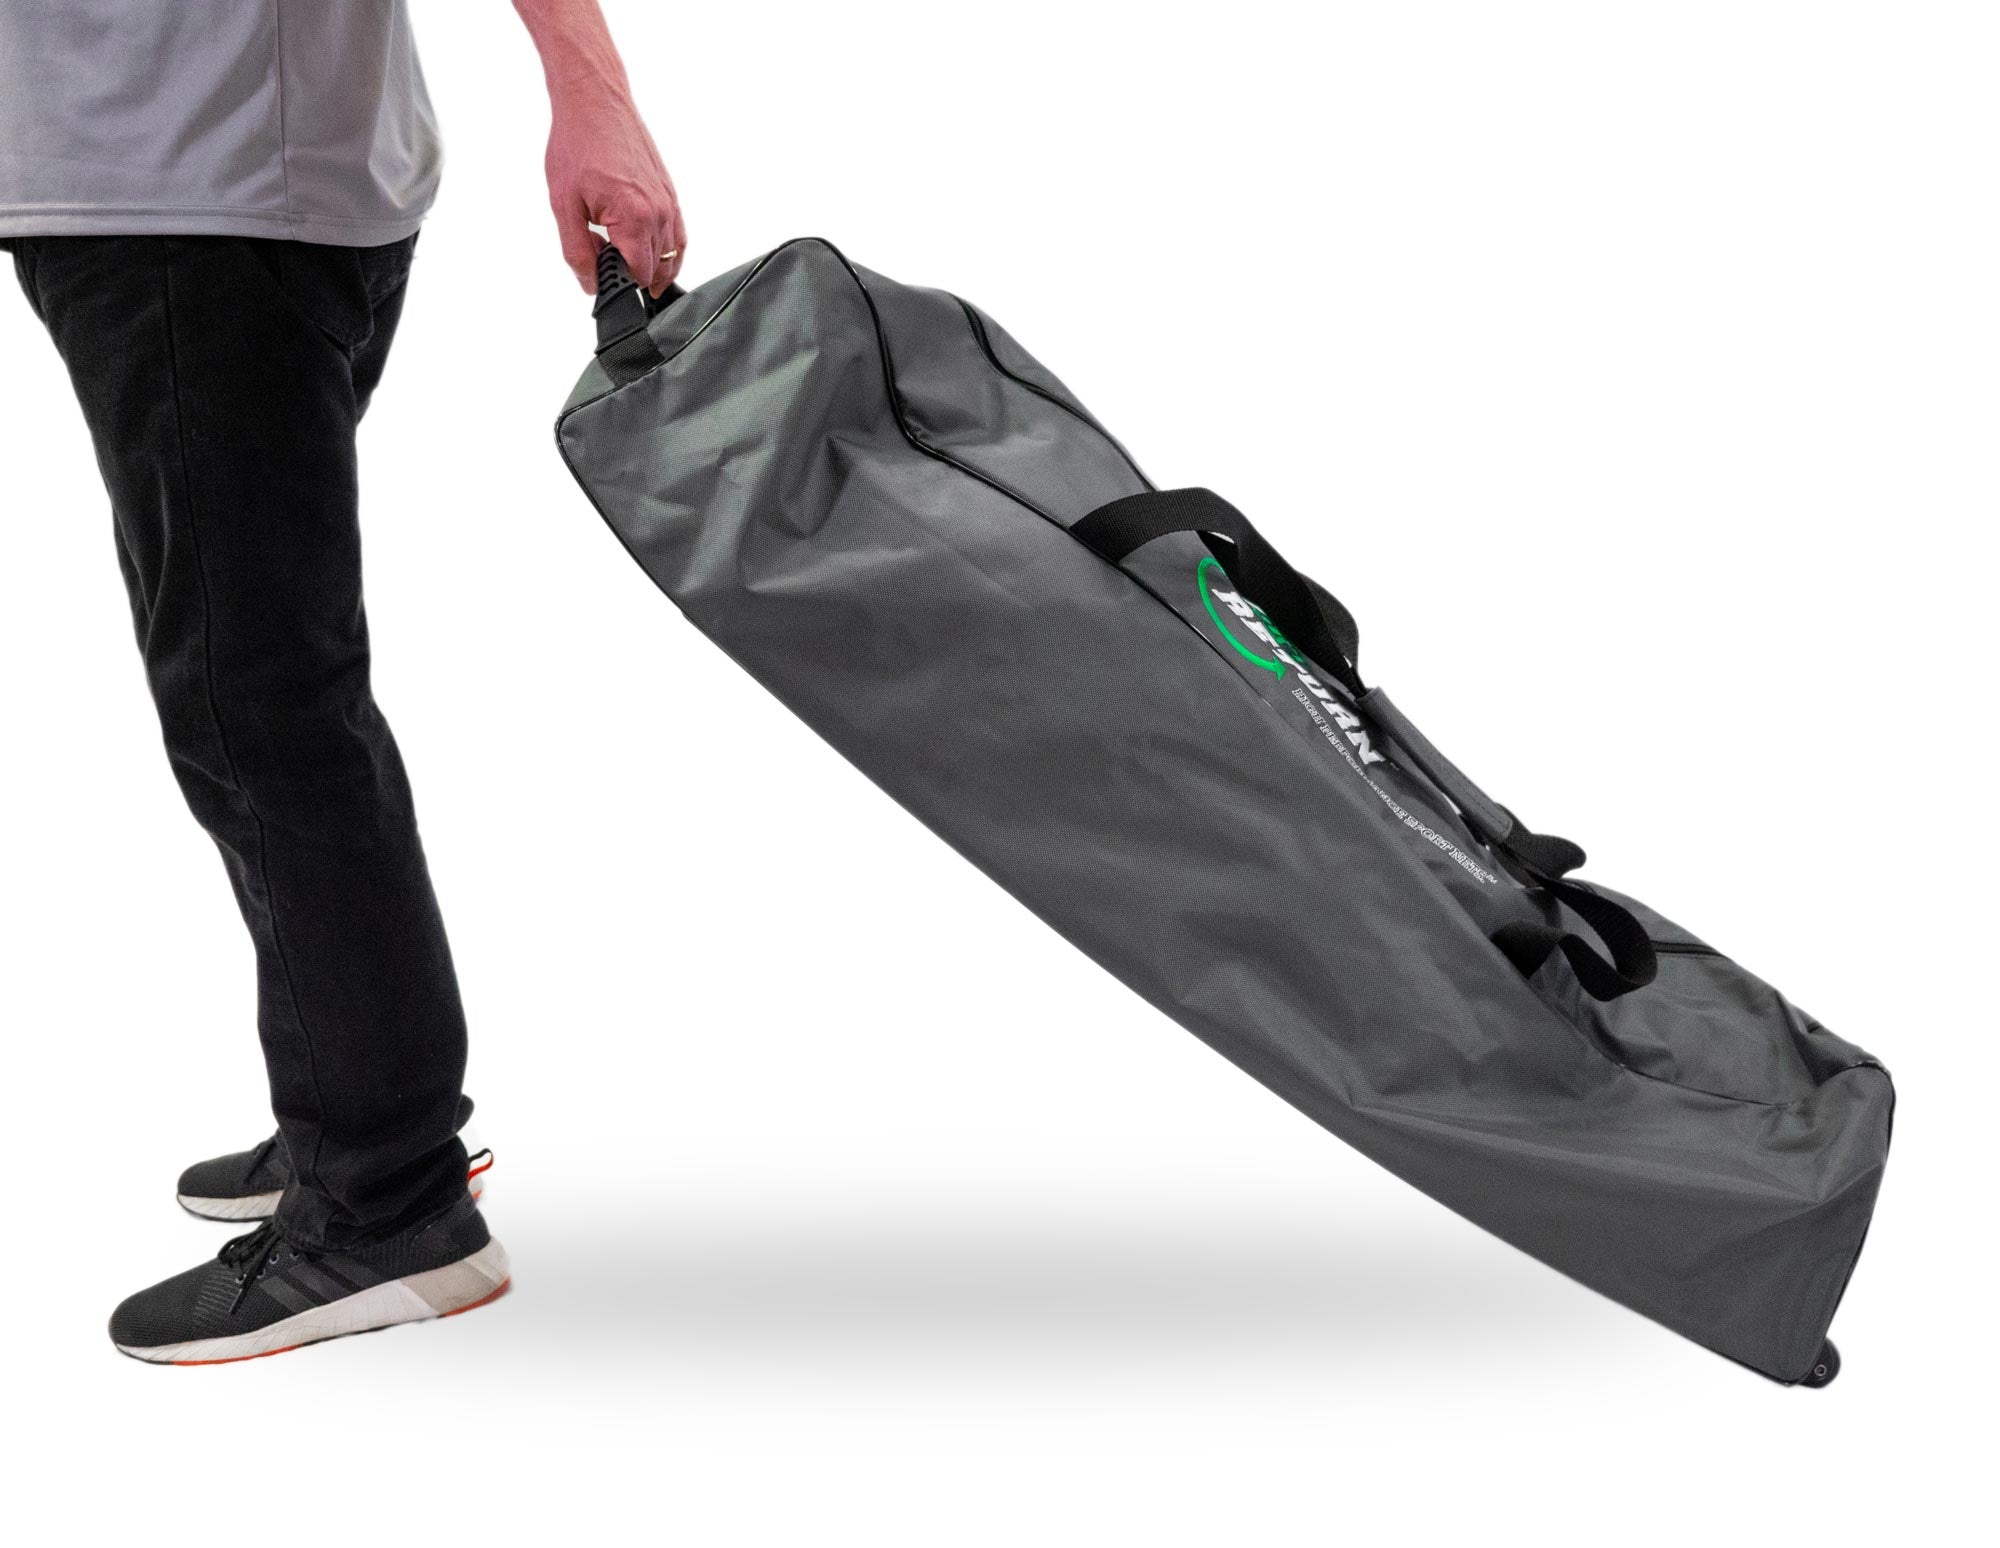 Pro on the Go Duffle Bag